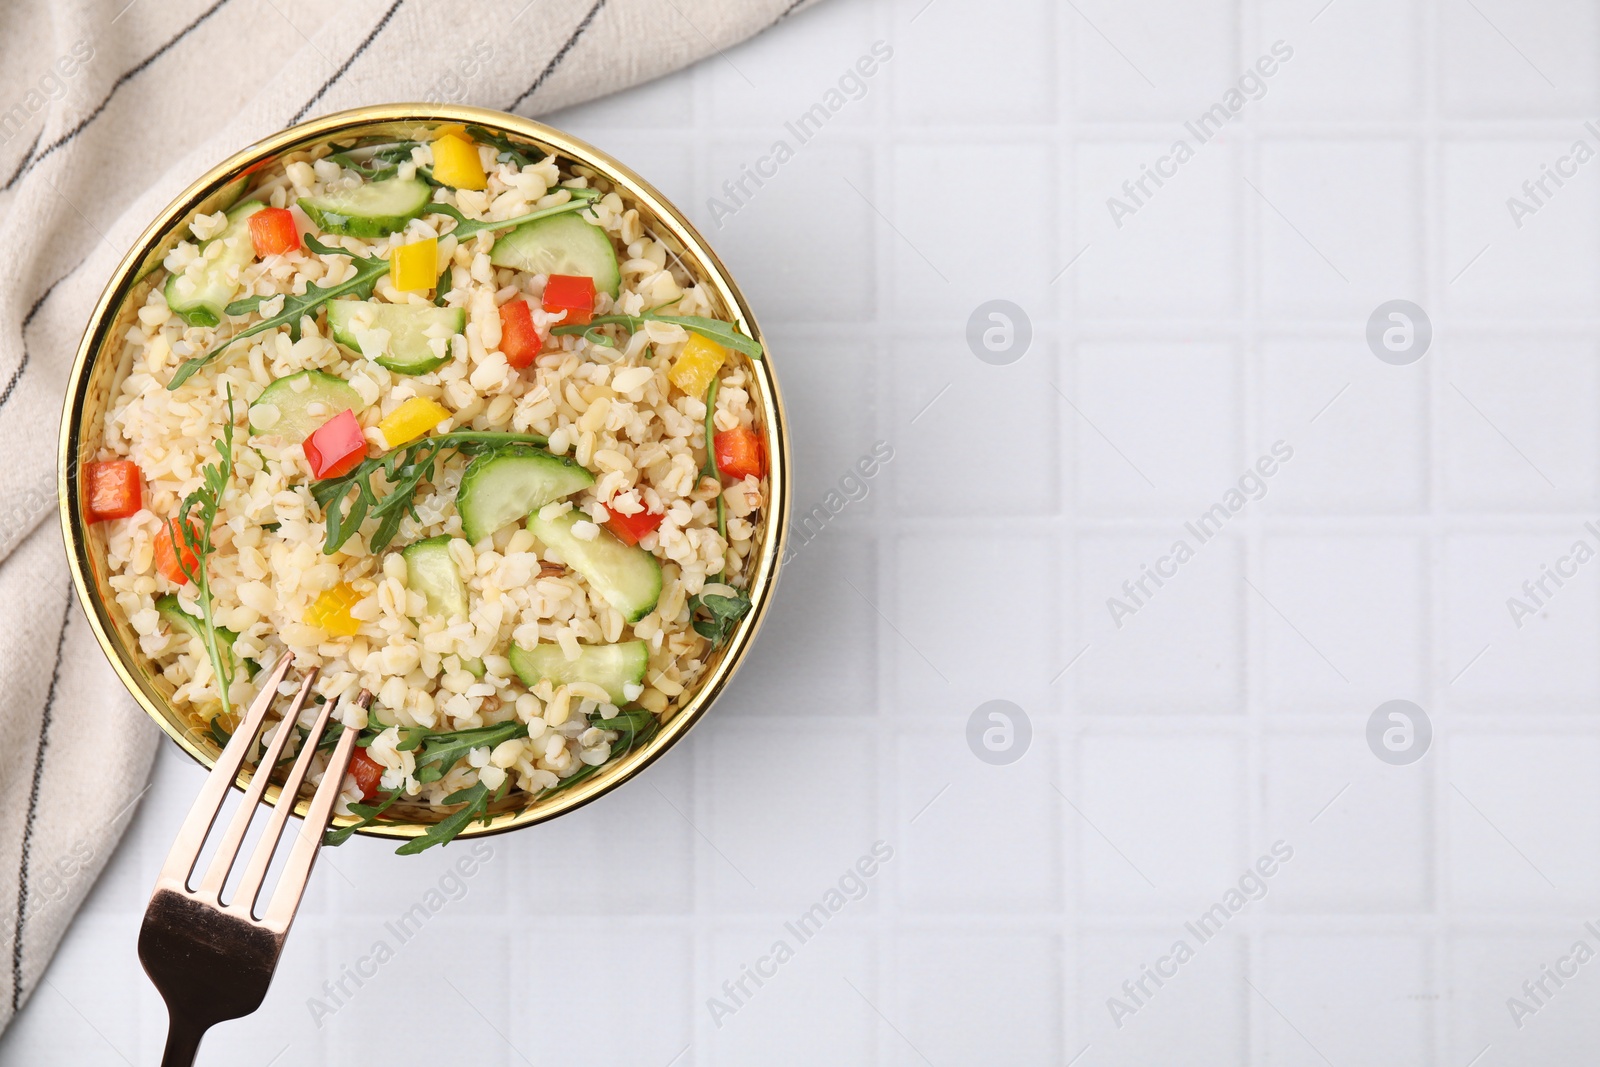 Photo of Cooked bulgur with vegetables in bowl on white tiled table, top view. Space for text